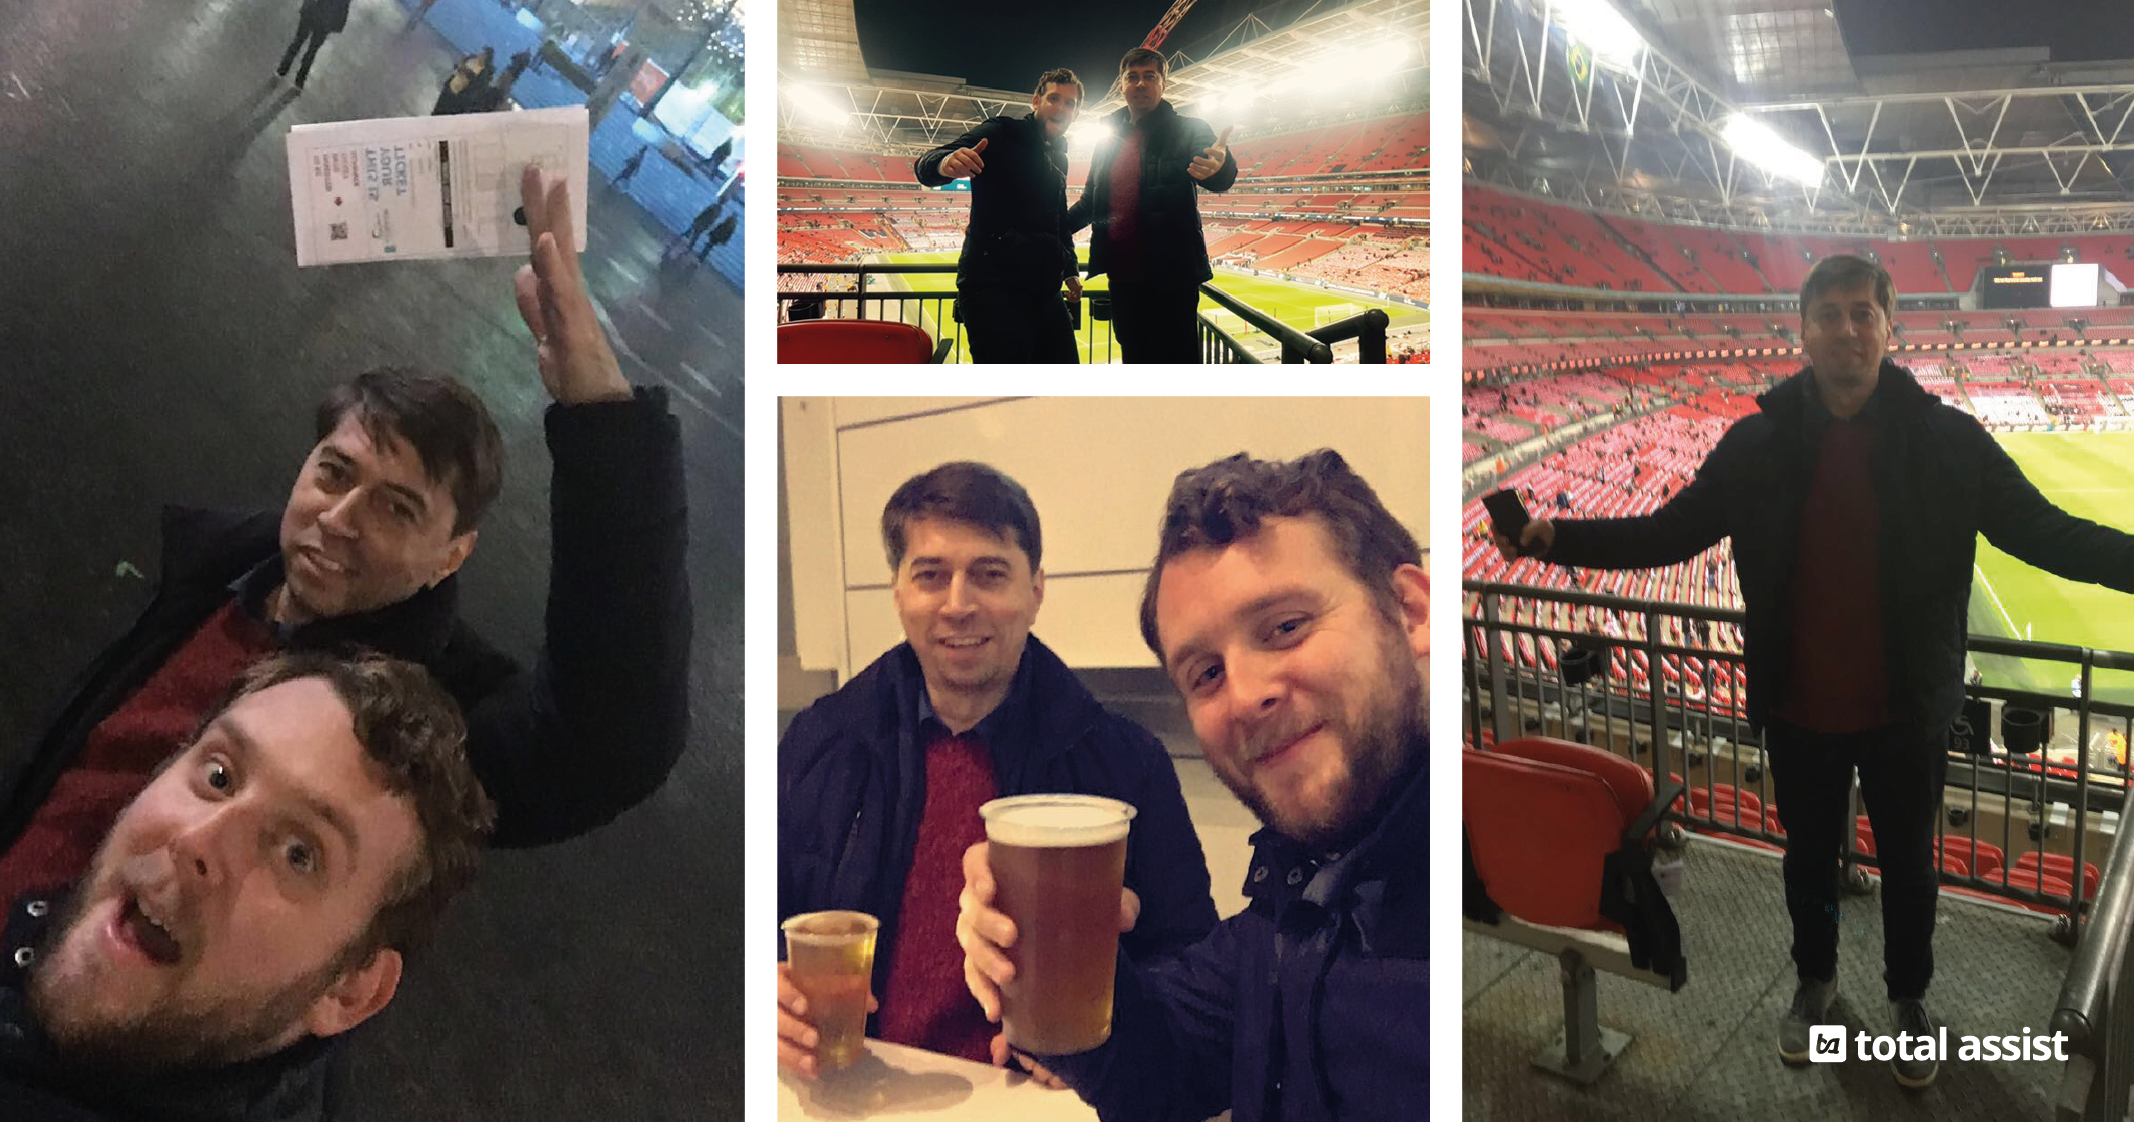 A Night at Wembley – Total Assist Prize Draw Winner